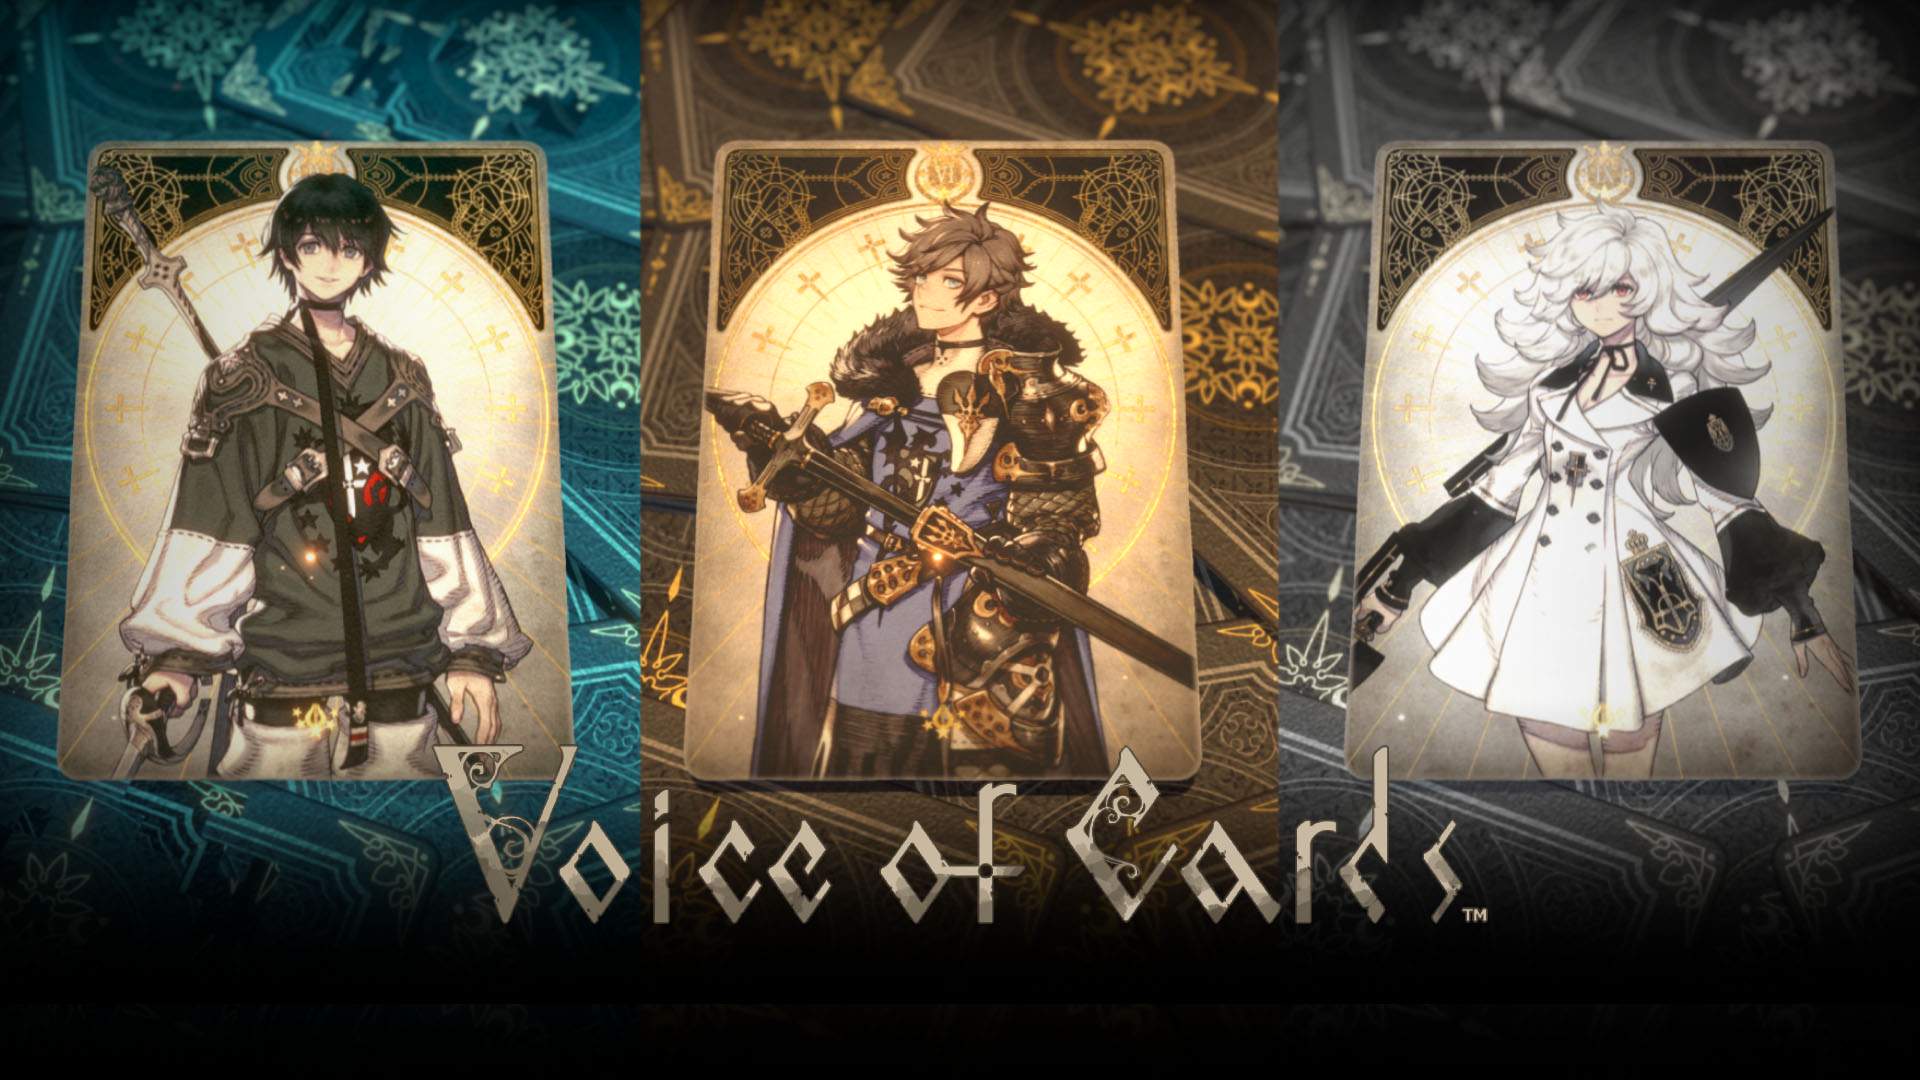 Key art for all three Voice of Cards titles including logo and one game card per title.